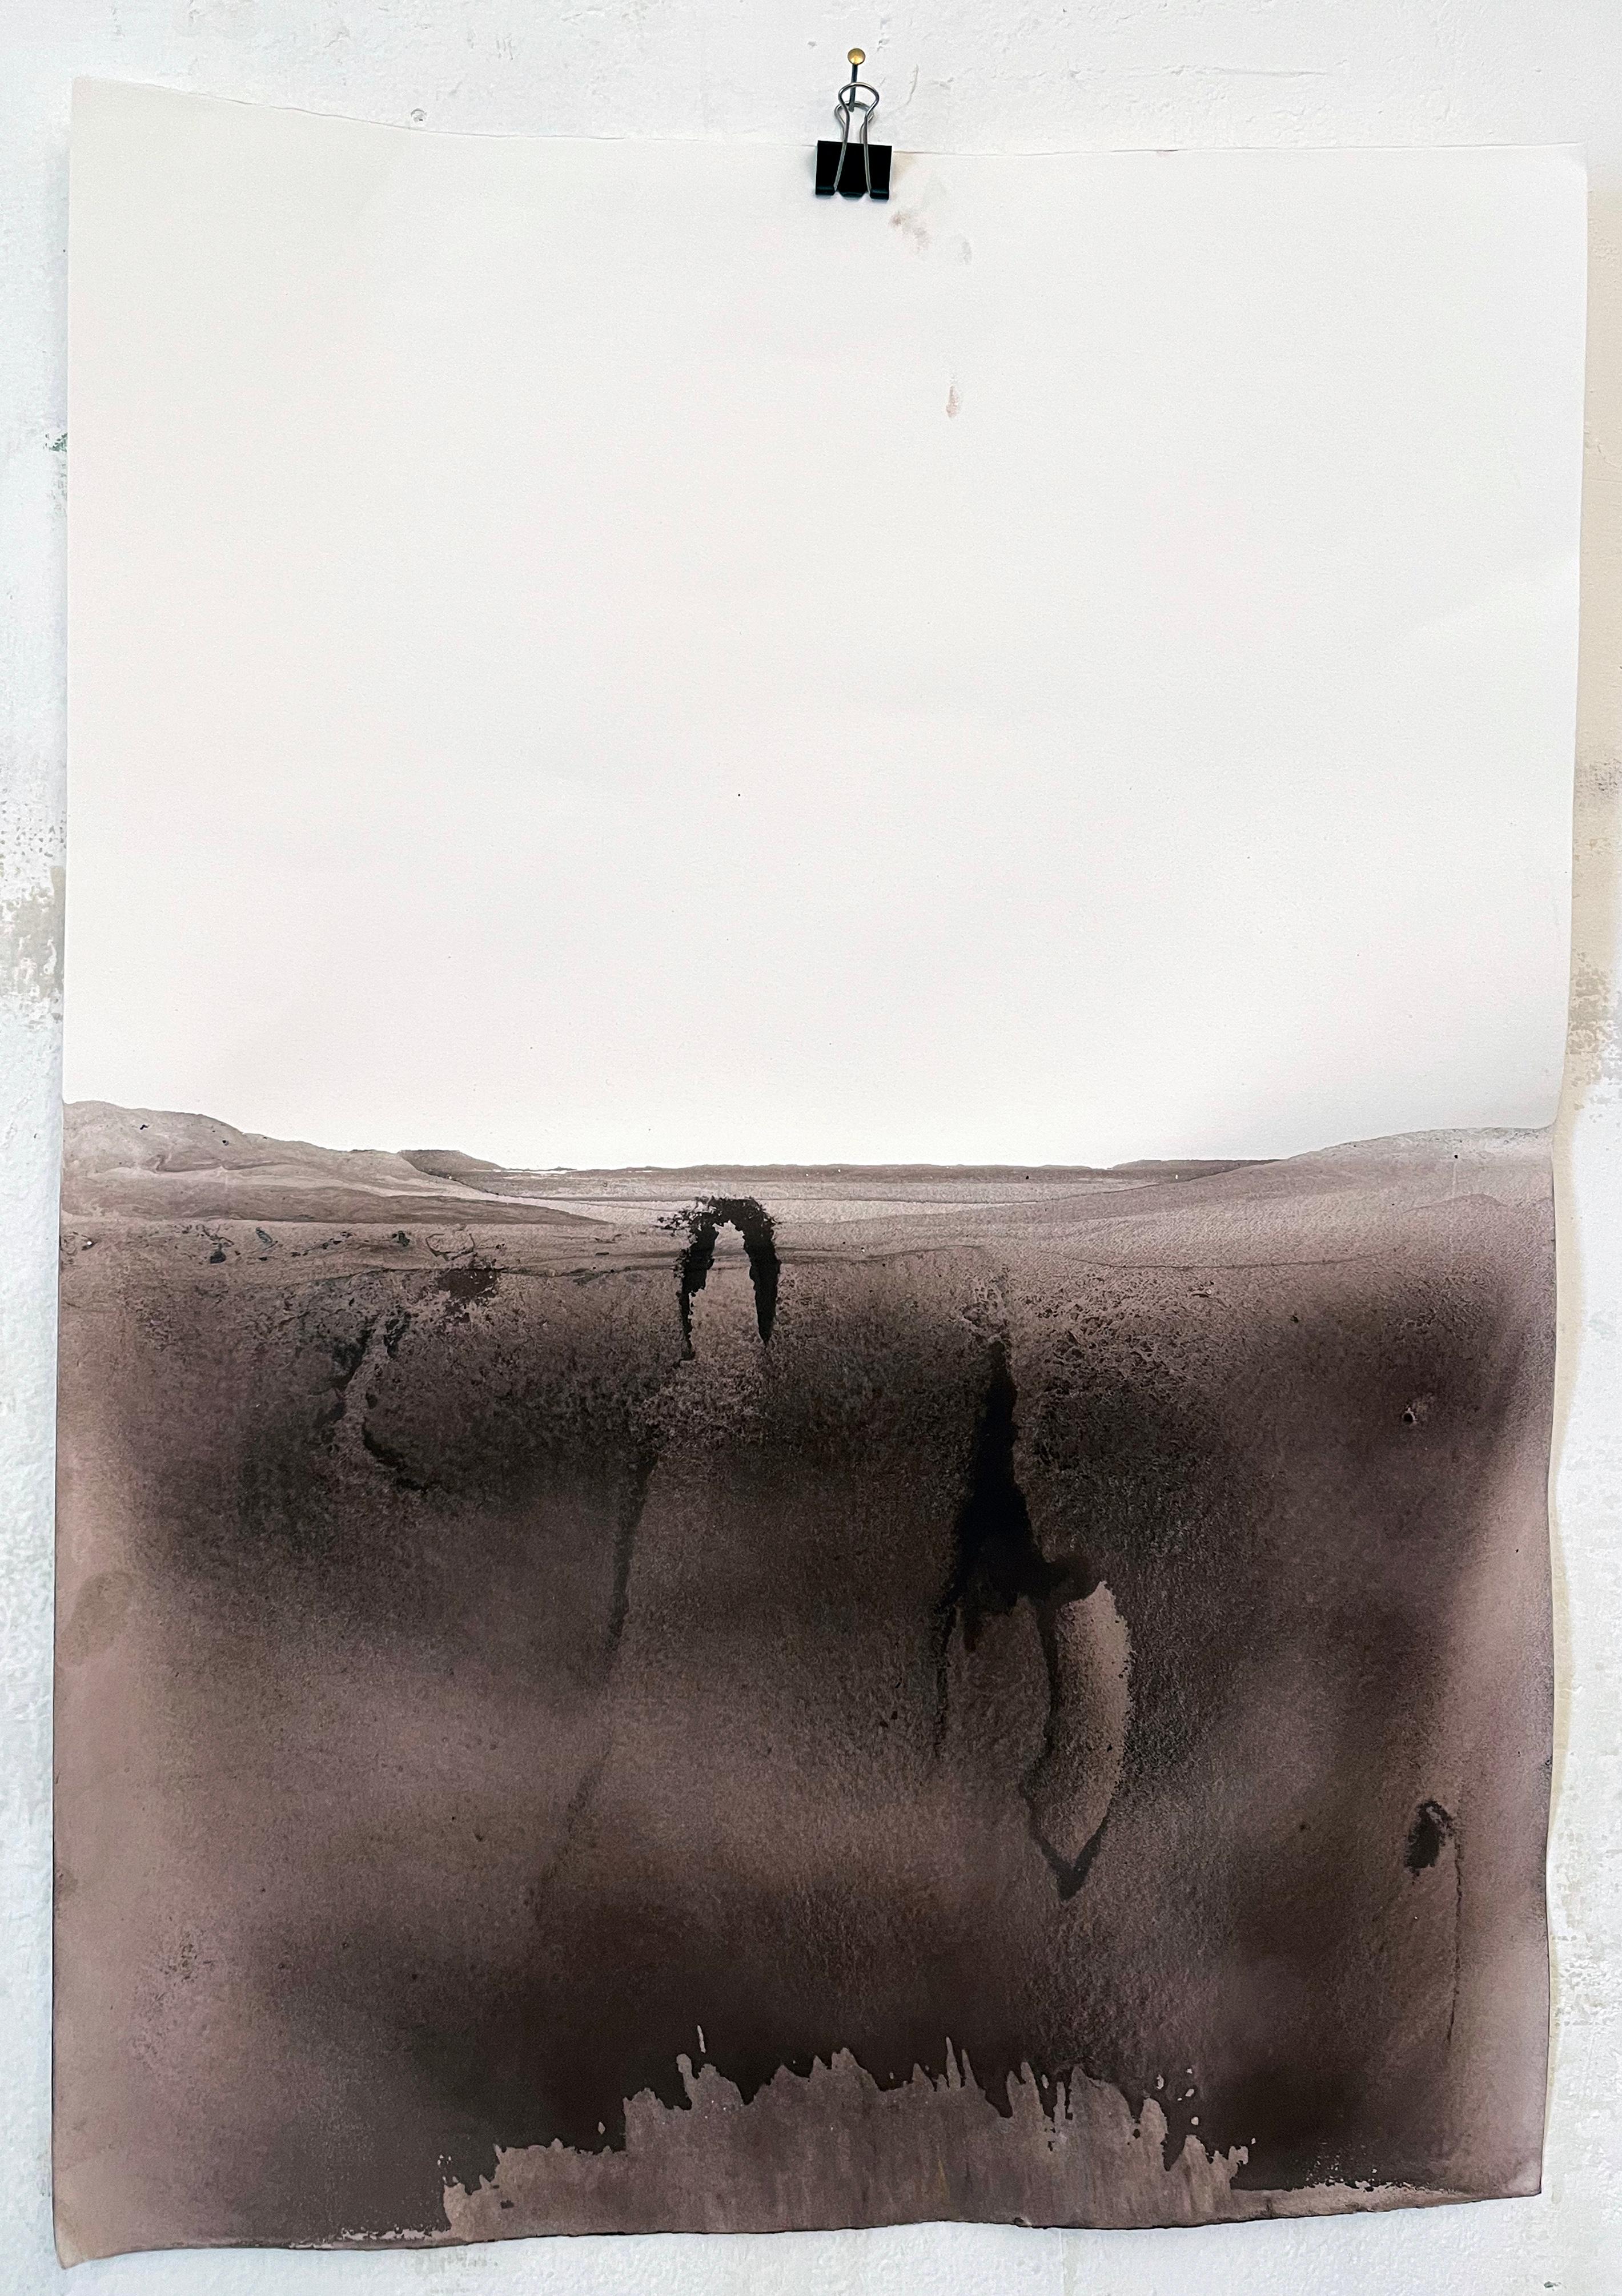 Landscape
mineral oxide on paper (fabriano) 
50 x 72 cm it i
Frame options available
her painting tells of the relationship between man, nature and time, the landscape, the sign and the trace,
through the stripping, reduction and subtraction of